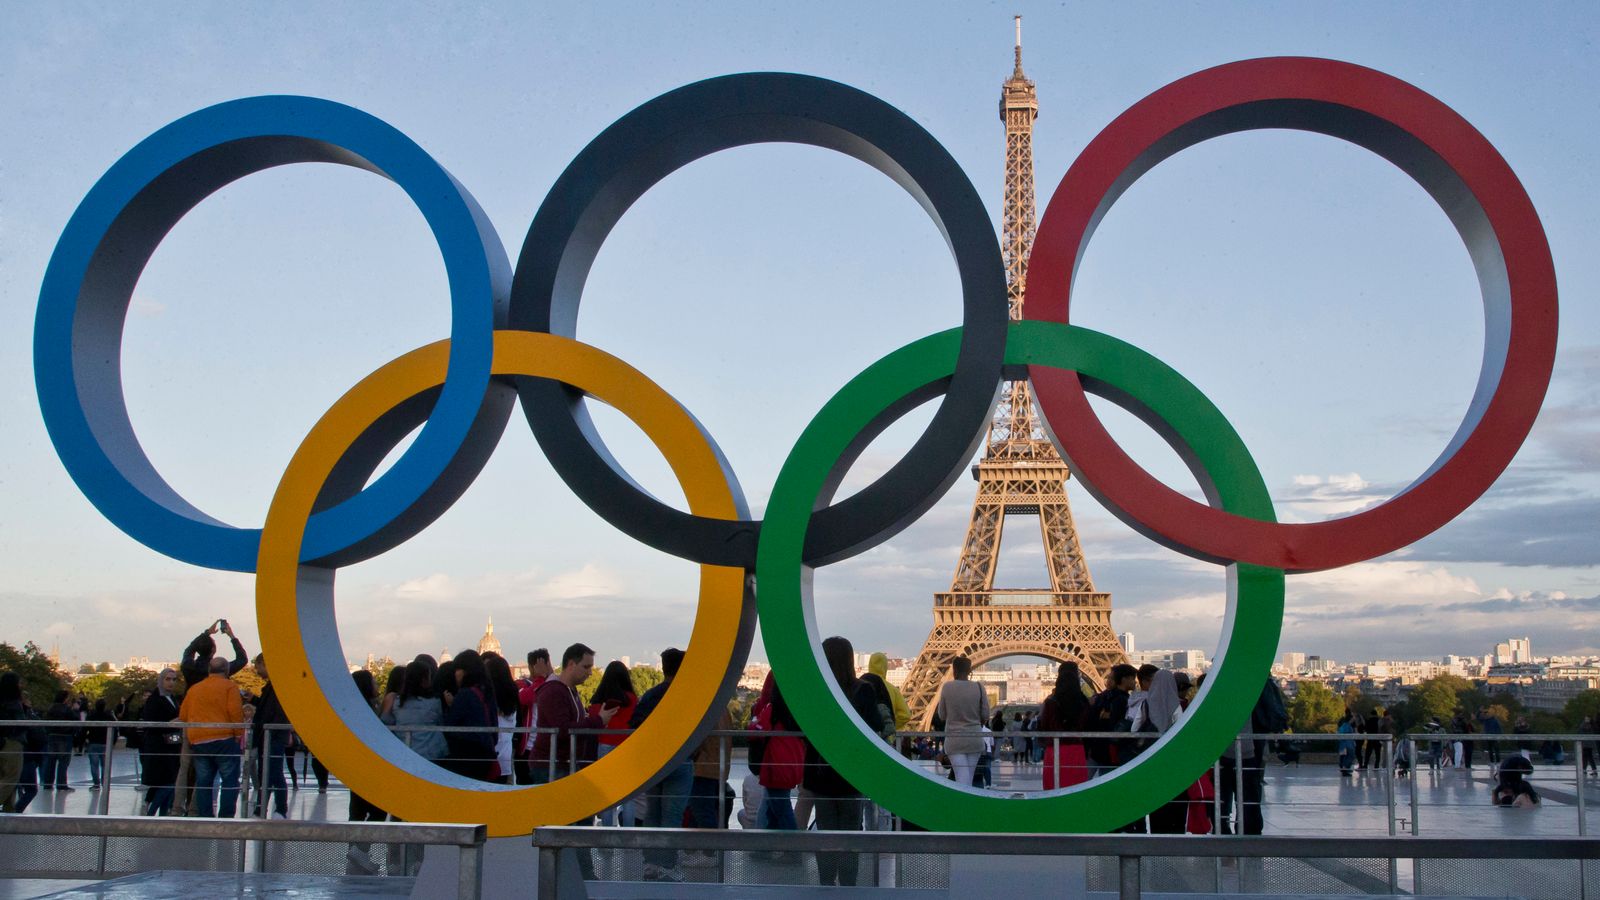 One year until Paris 2024 Security scrutiny, Team GB mascots and